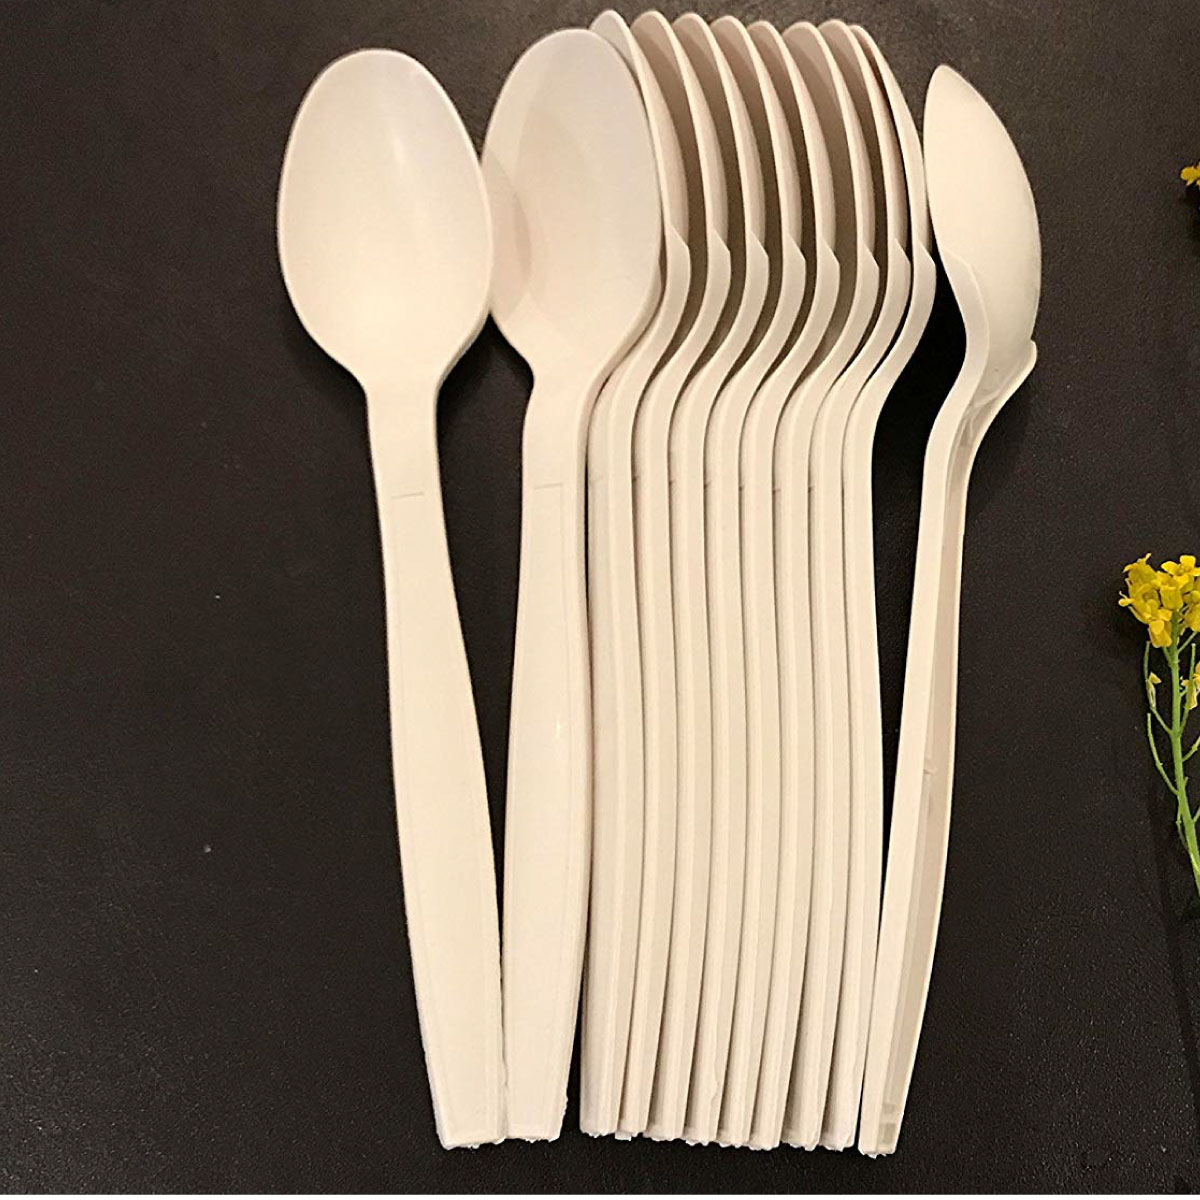 100 Corn Starch Tasting Spoons Biodegradable and Compostable